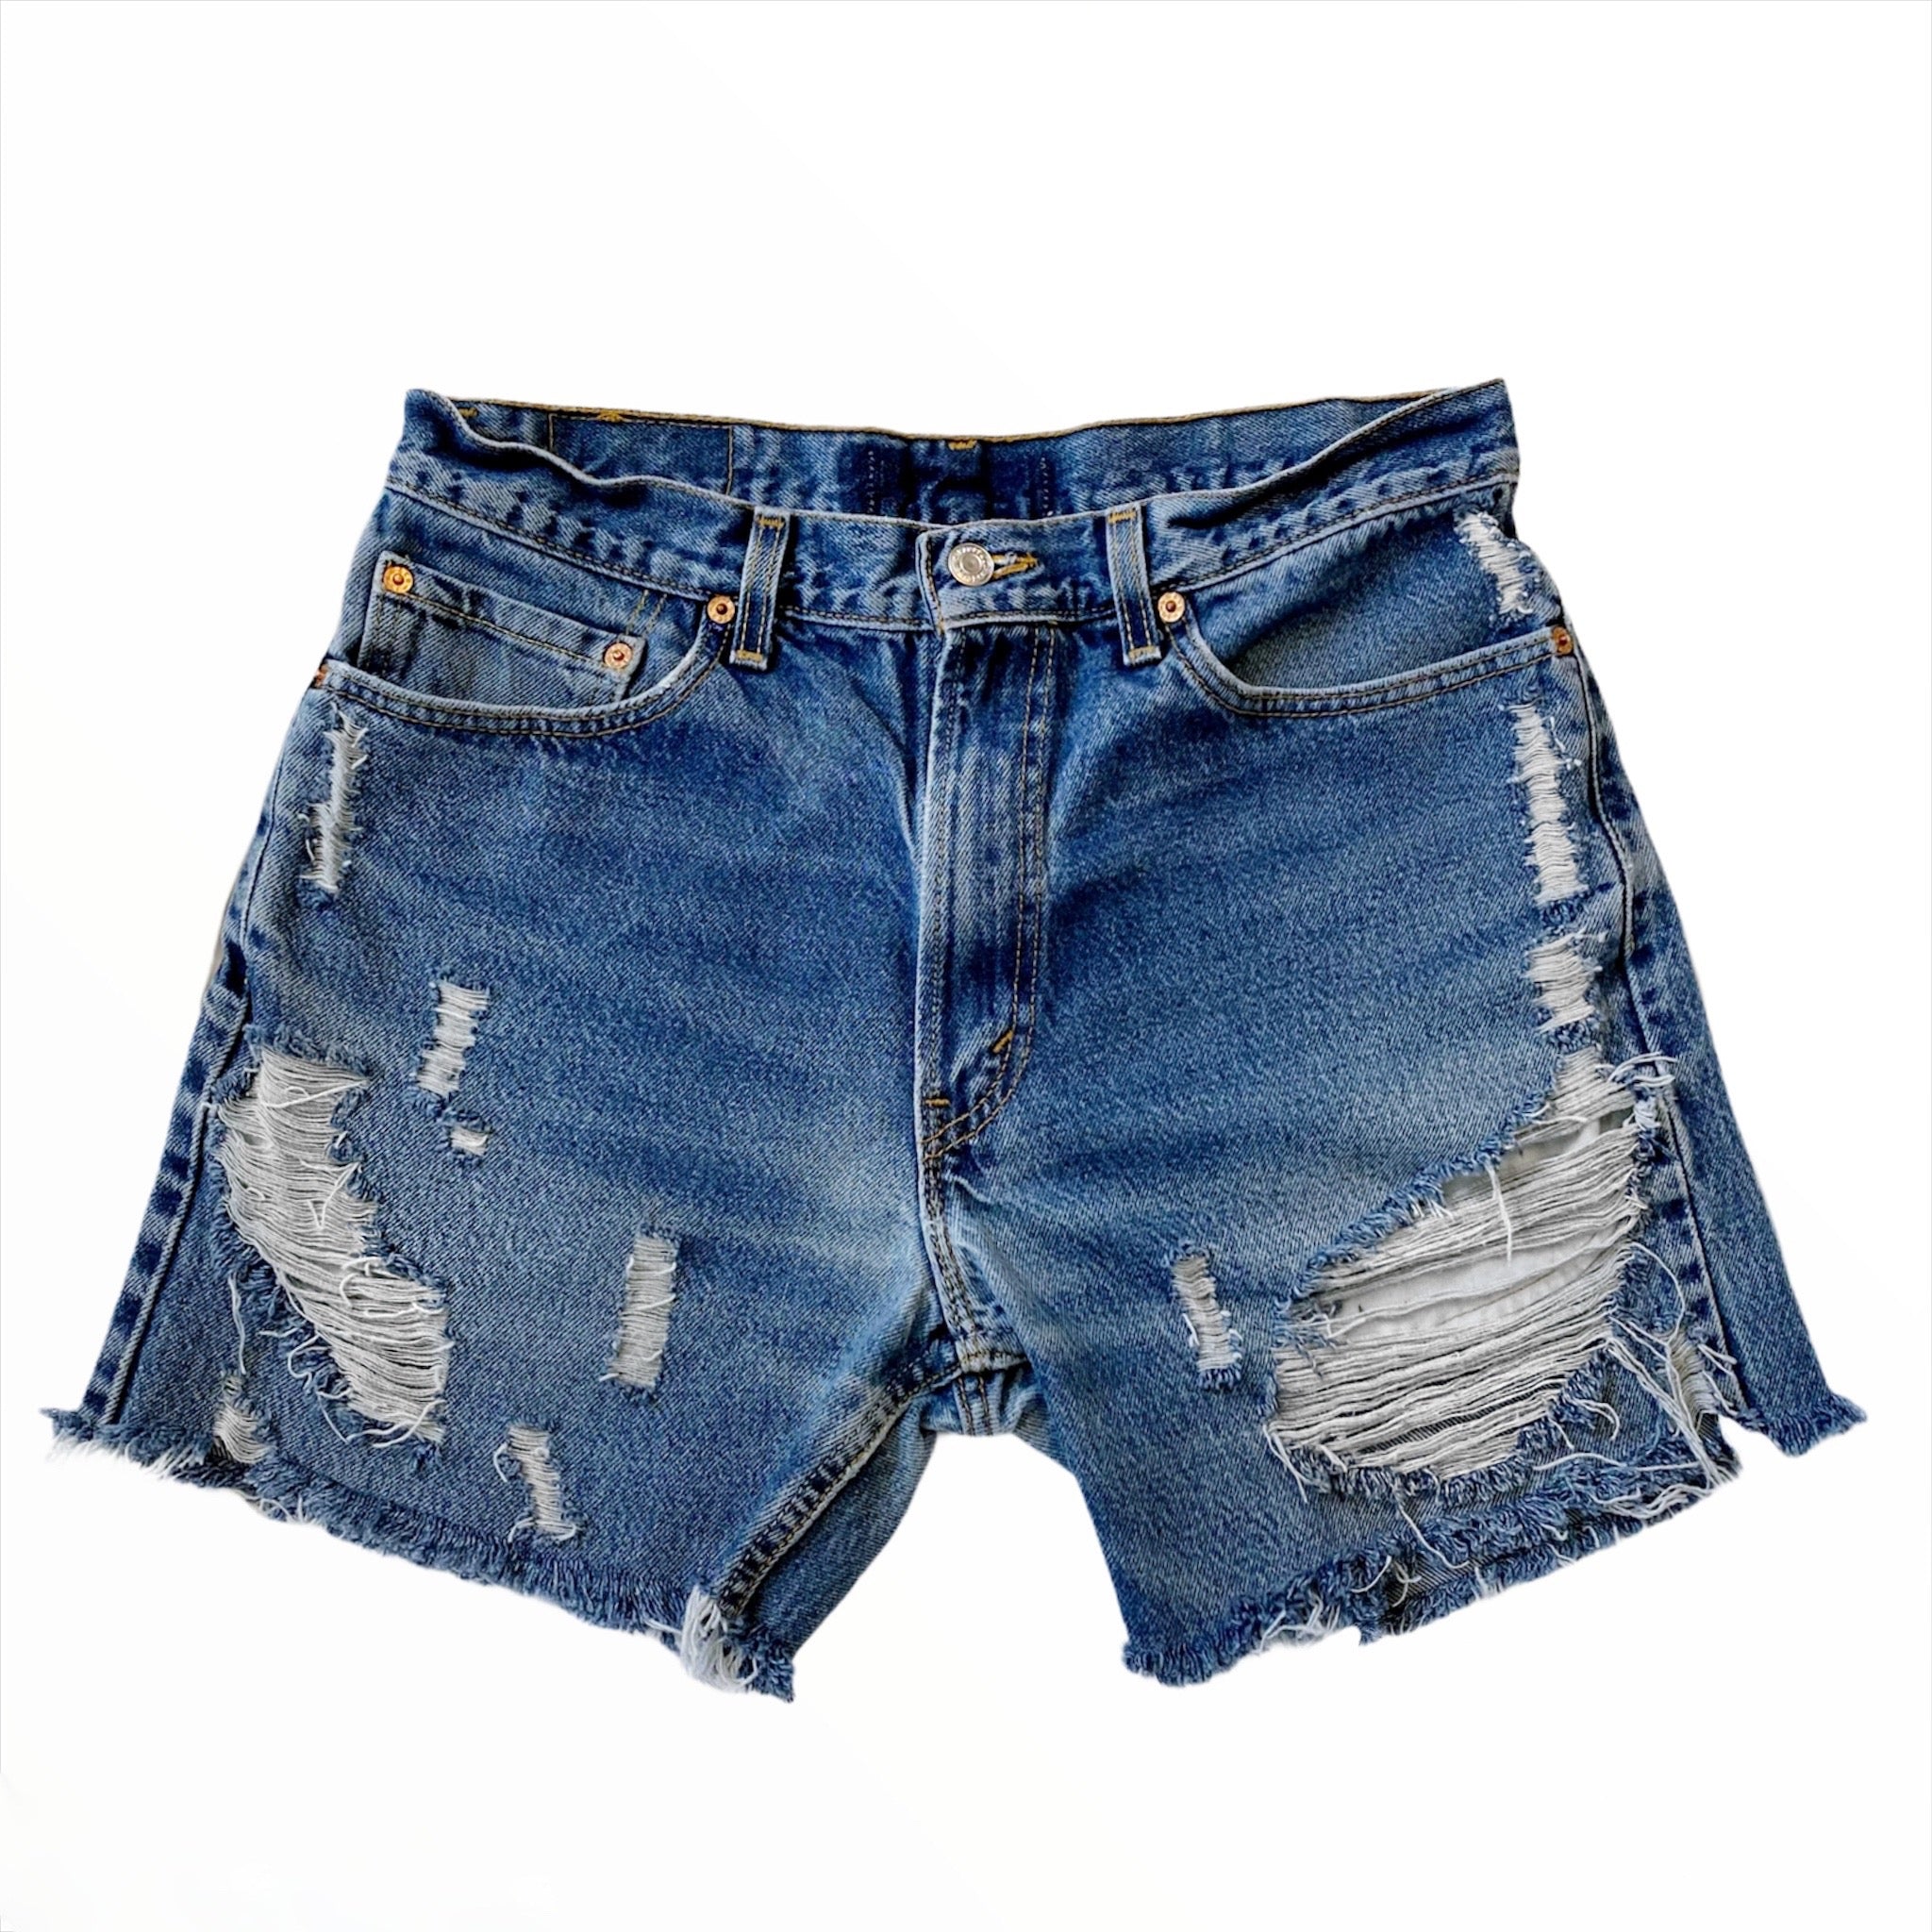 Made To Order Distressed Denim Shorts